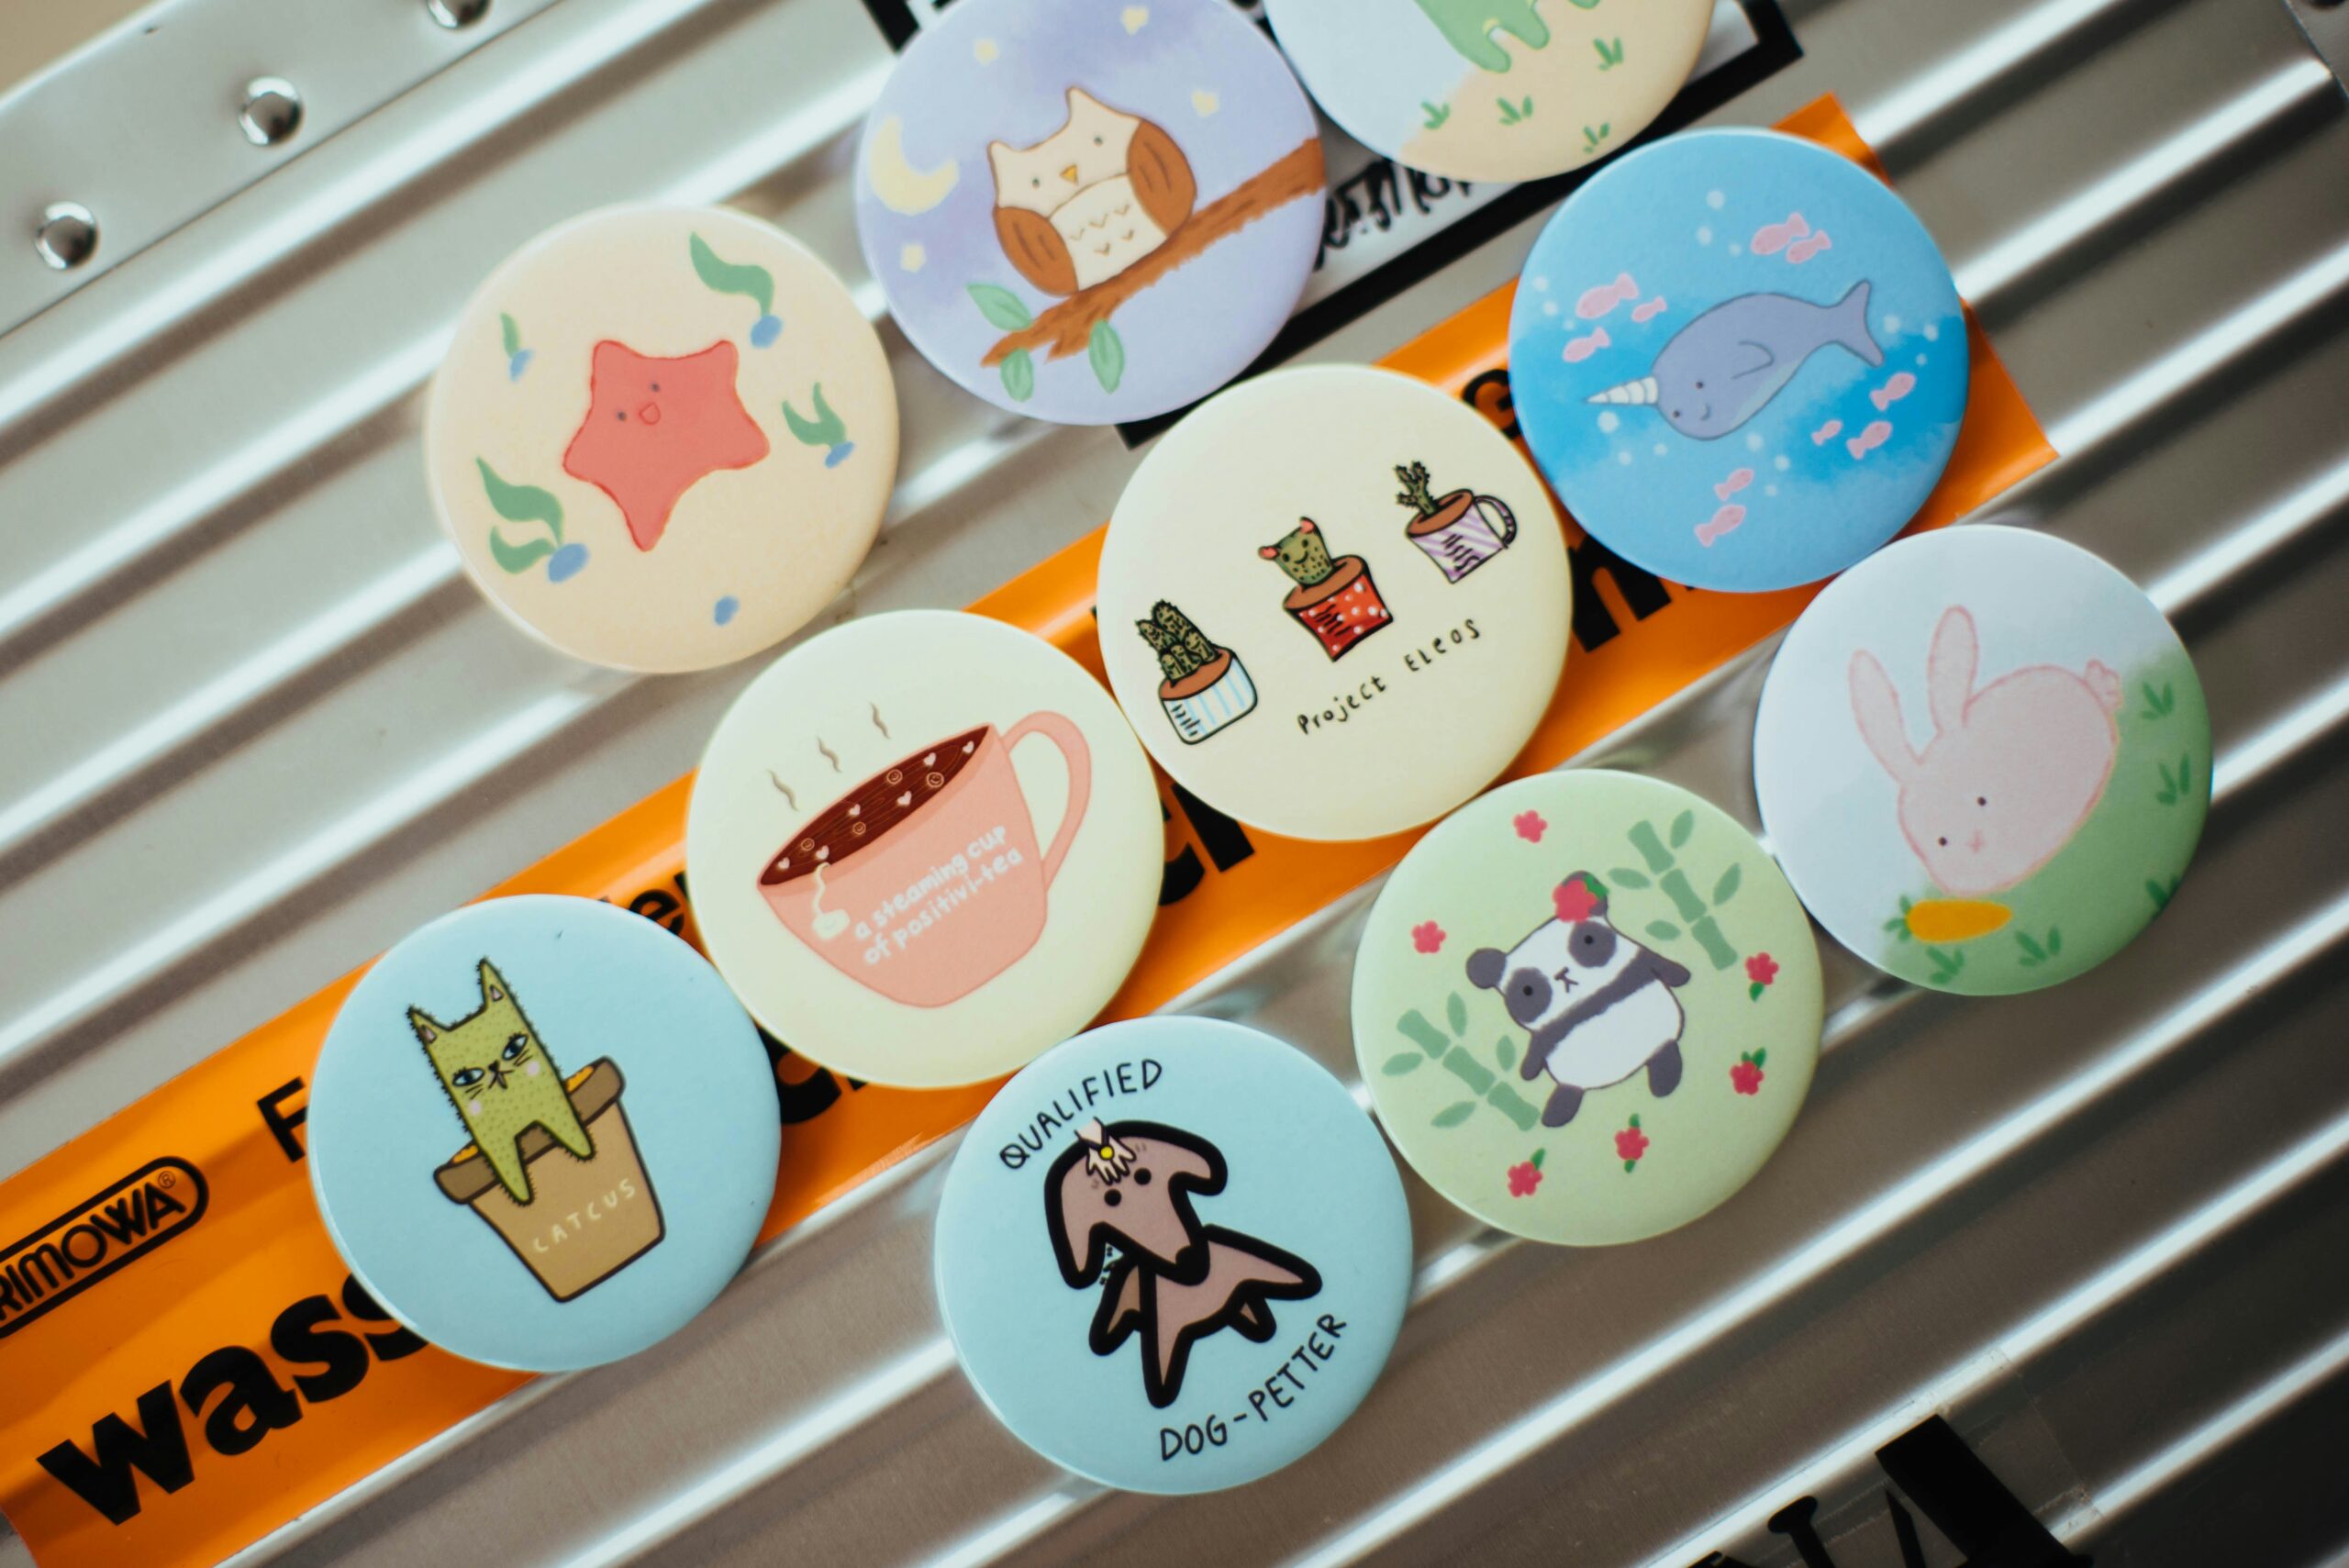 A Guide on How to Design Pin Badges That Will Promote a Business